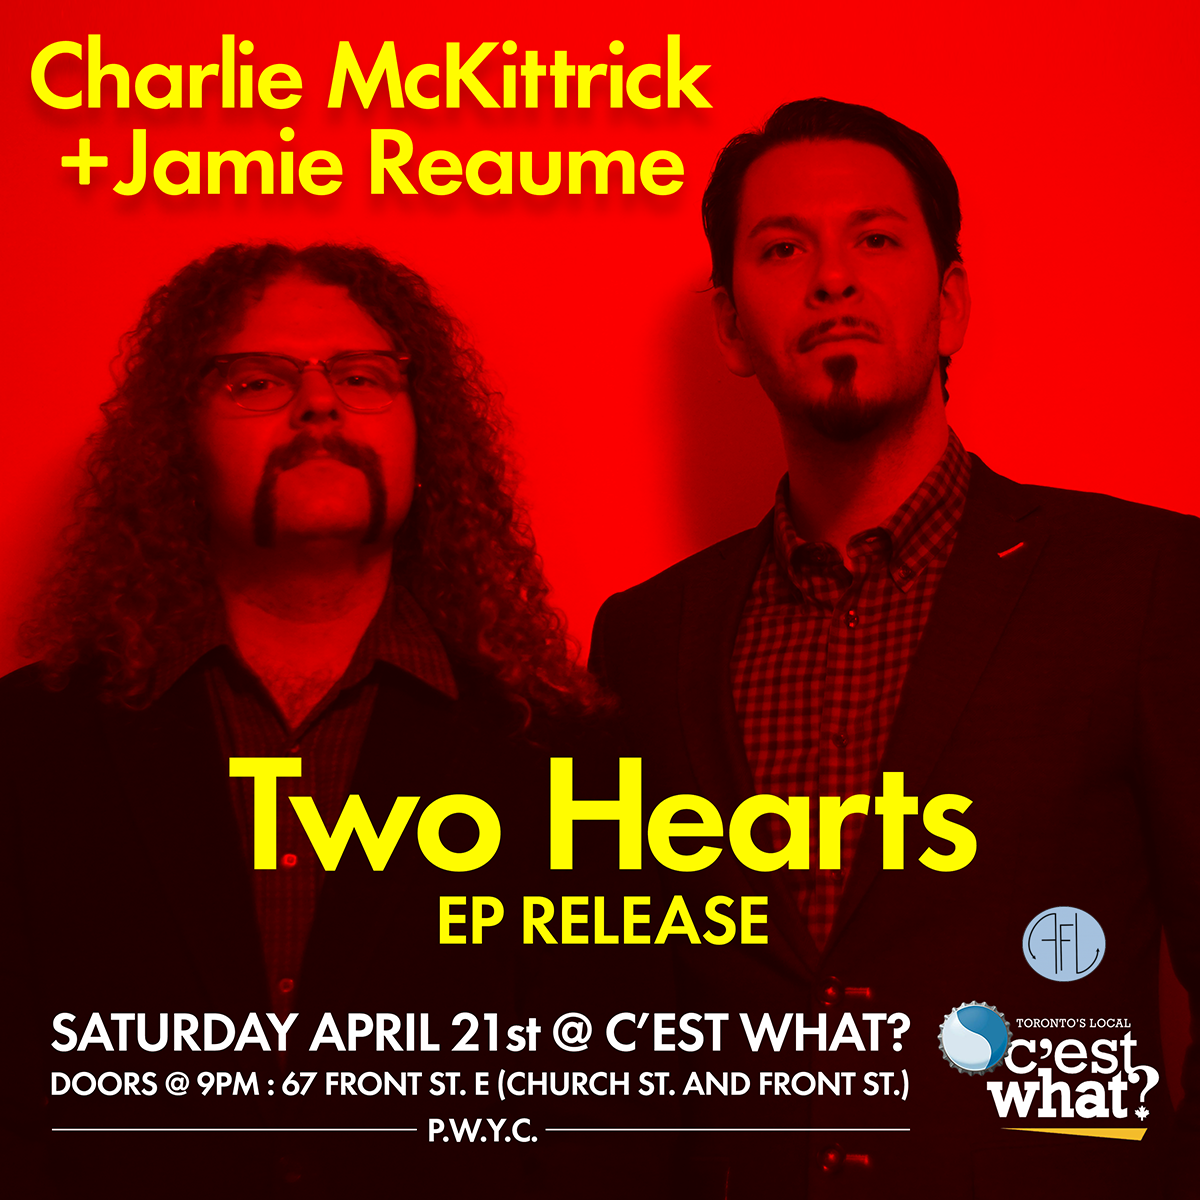 Two Hearts - Charlie McKittrick and Jamie Reaume